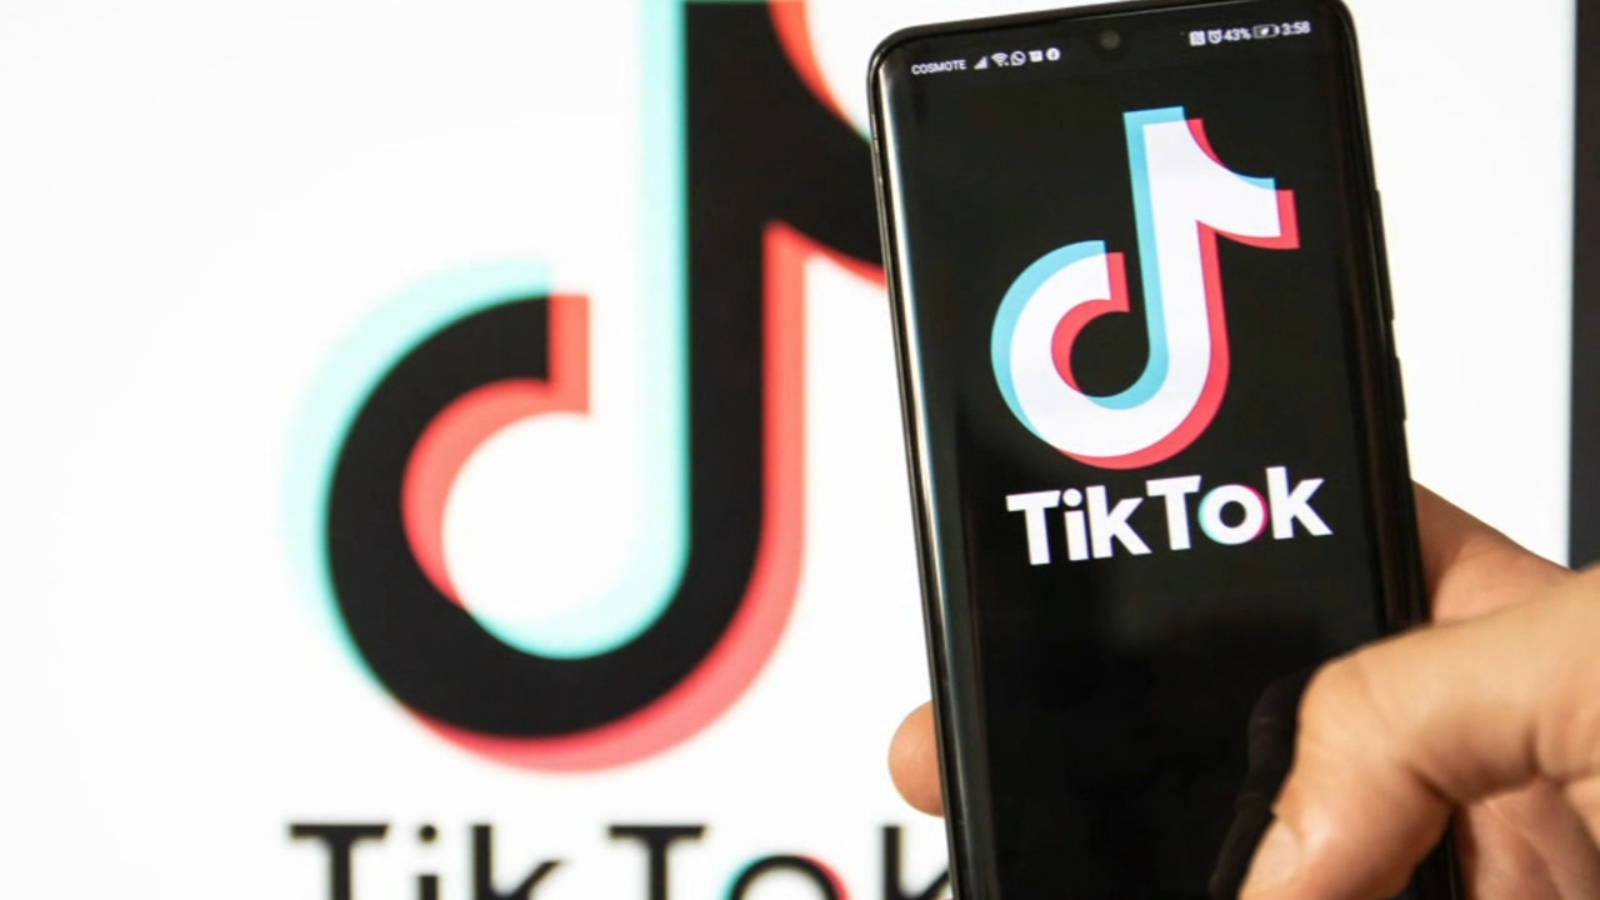 Is Tiktok getting banned? Company vows legal challenge to potential US app ban [Video]